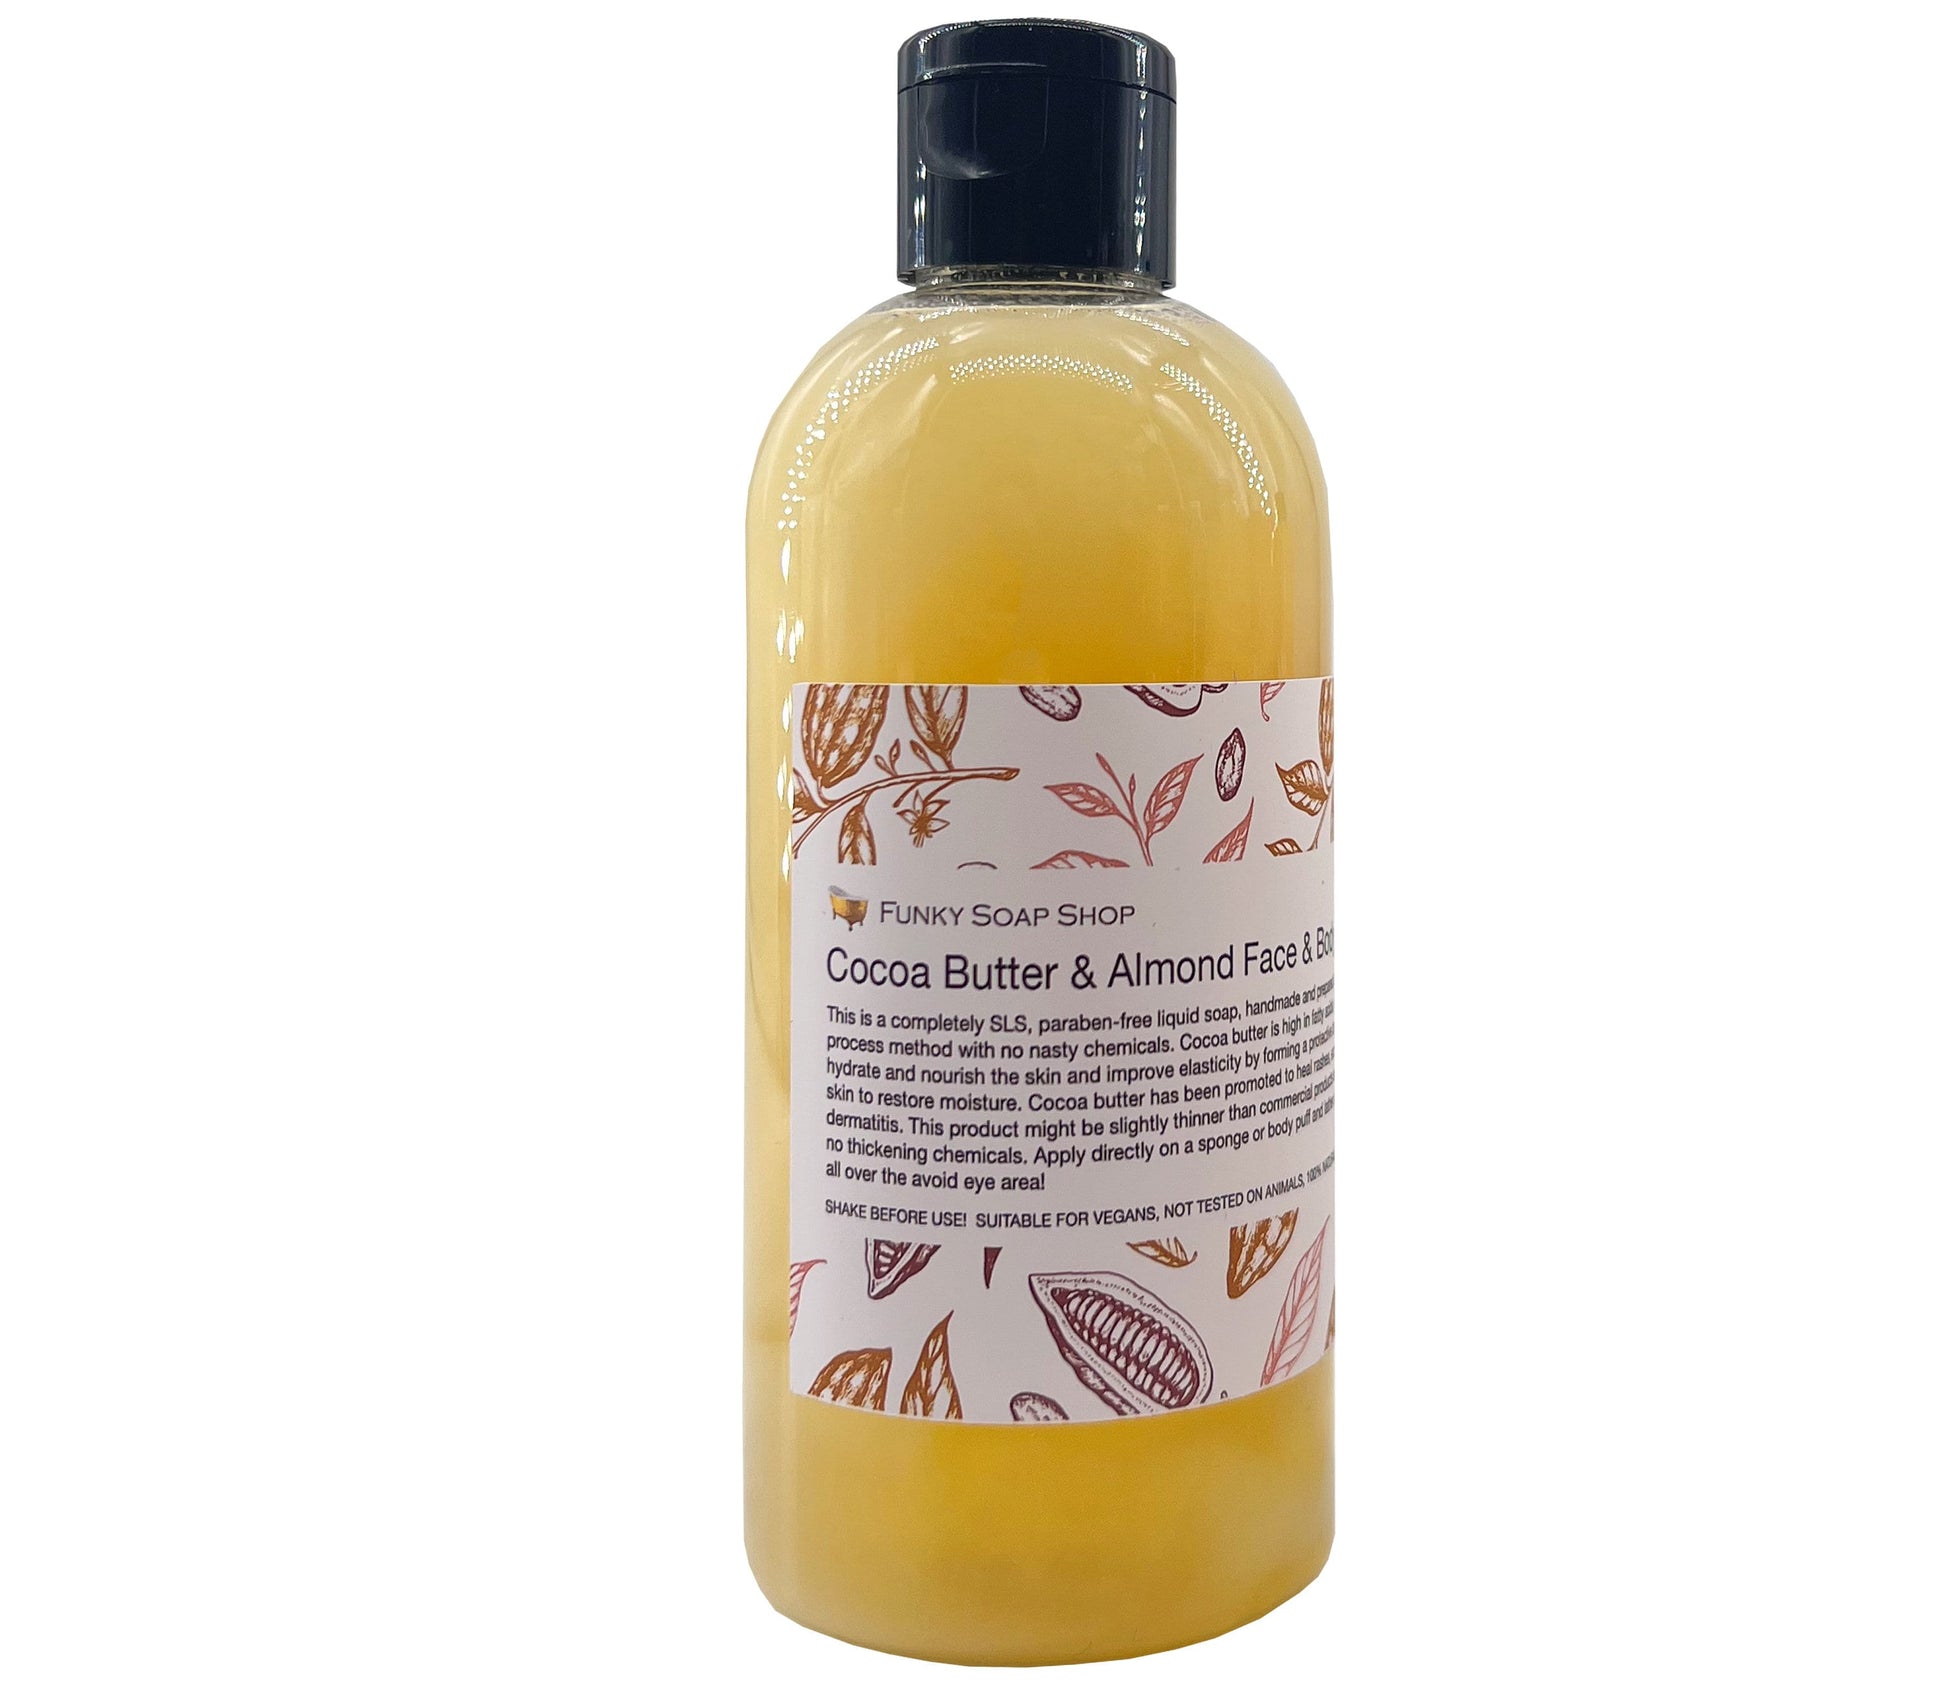 Cocoa Butter & Almond Face & Body Wash - Funky Soap Shop